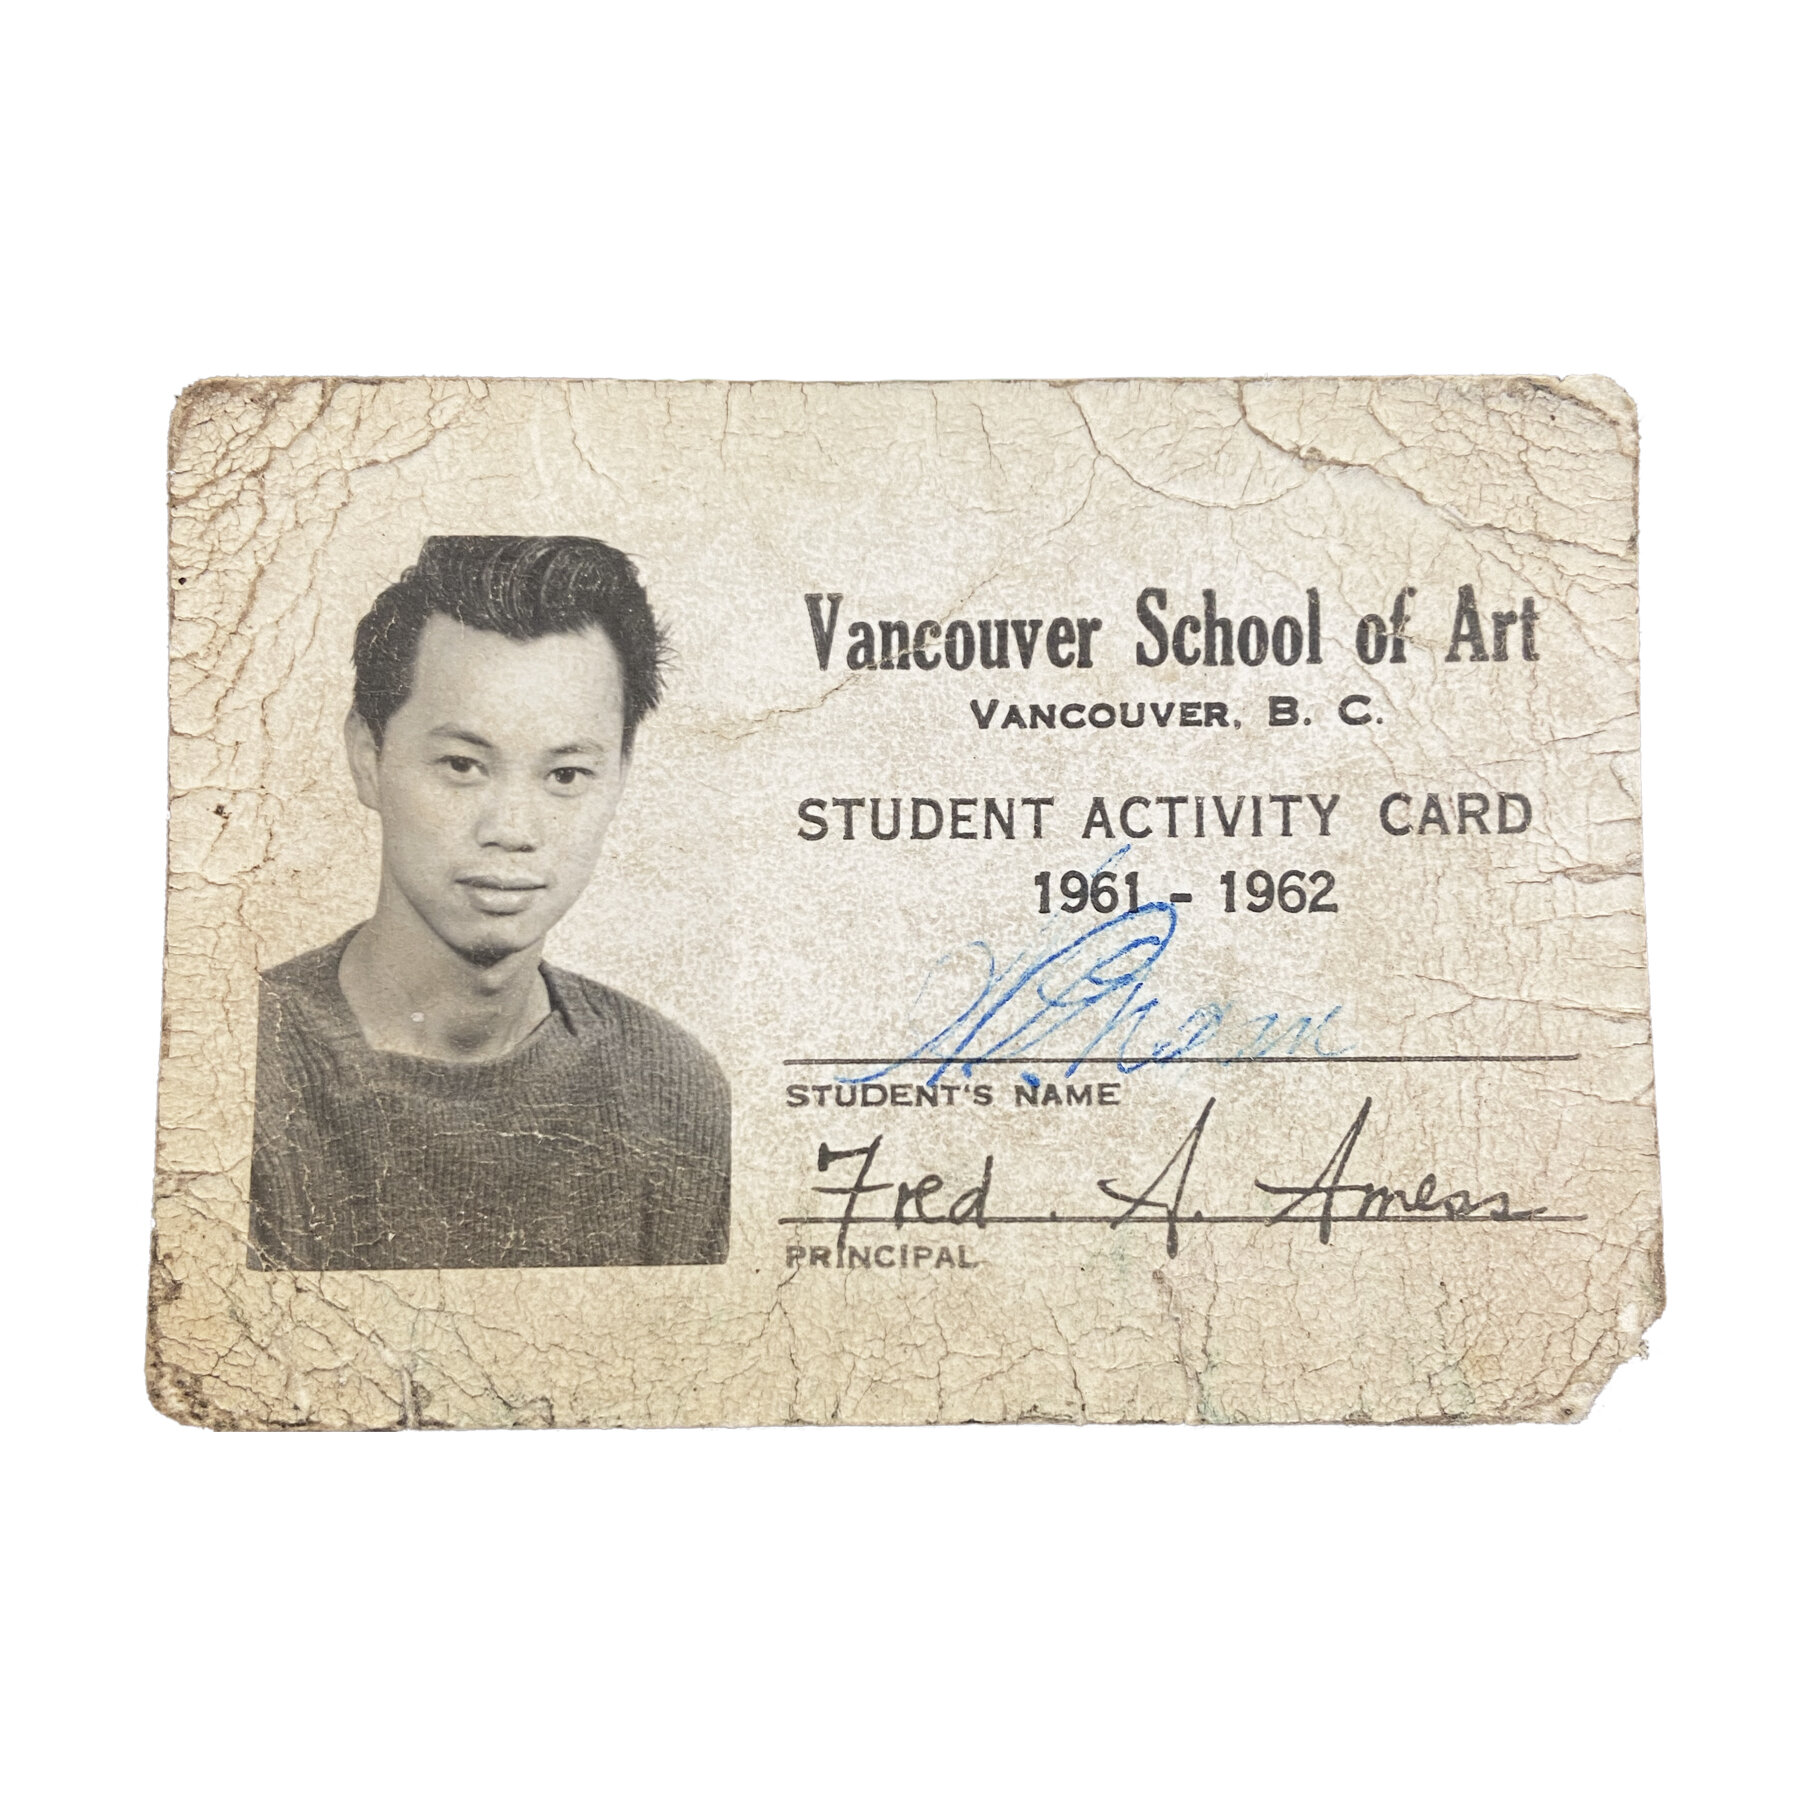 Wayne&rsquo;s &ldquo;Student Activity Card&rdquo; from the Vancouver School of Art (now @emilycarru), issued the year before he graduated with honours. 

#waynengan #emilycarru #vancouverschoolofart #vintagevancouver #canadianartists